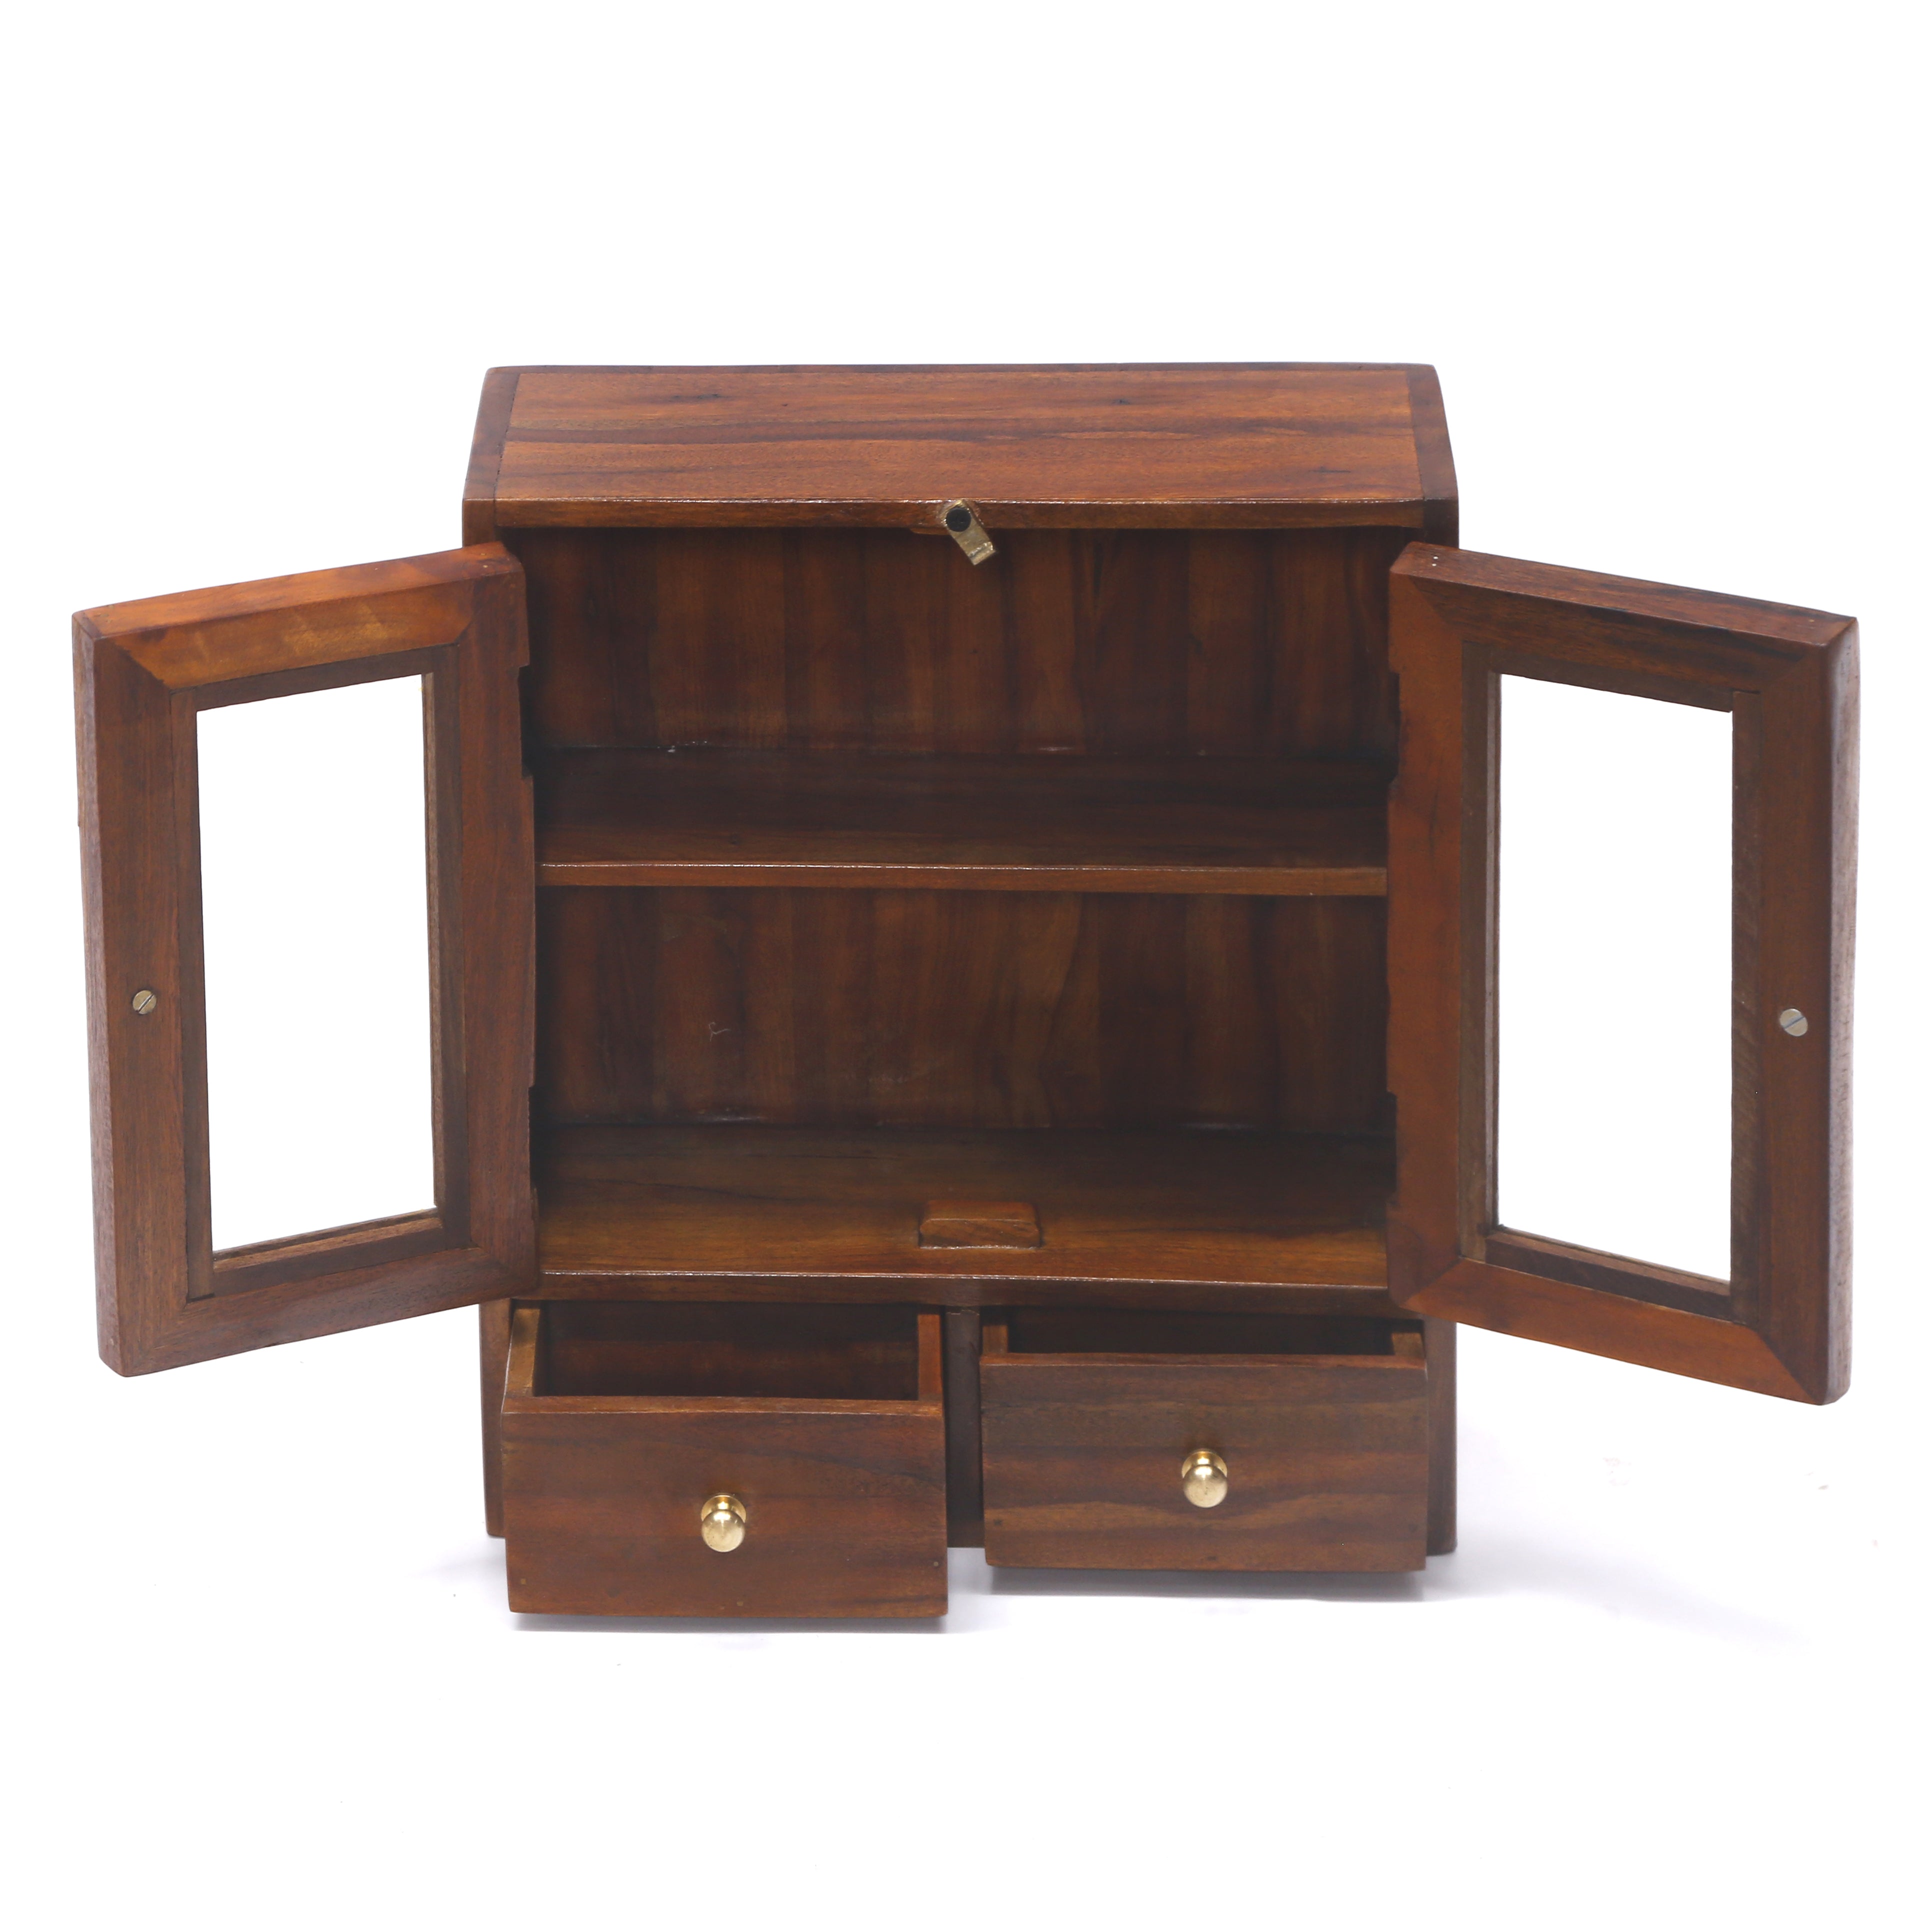 Double compartment with 2 Drawer Compact Cabinet Wall Cabinet